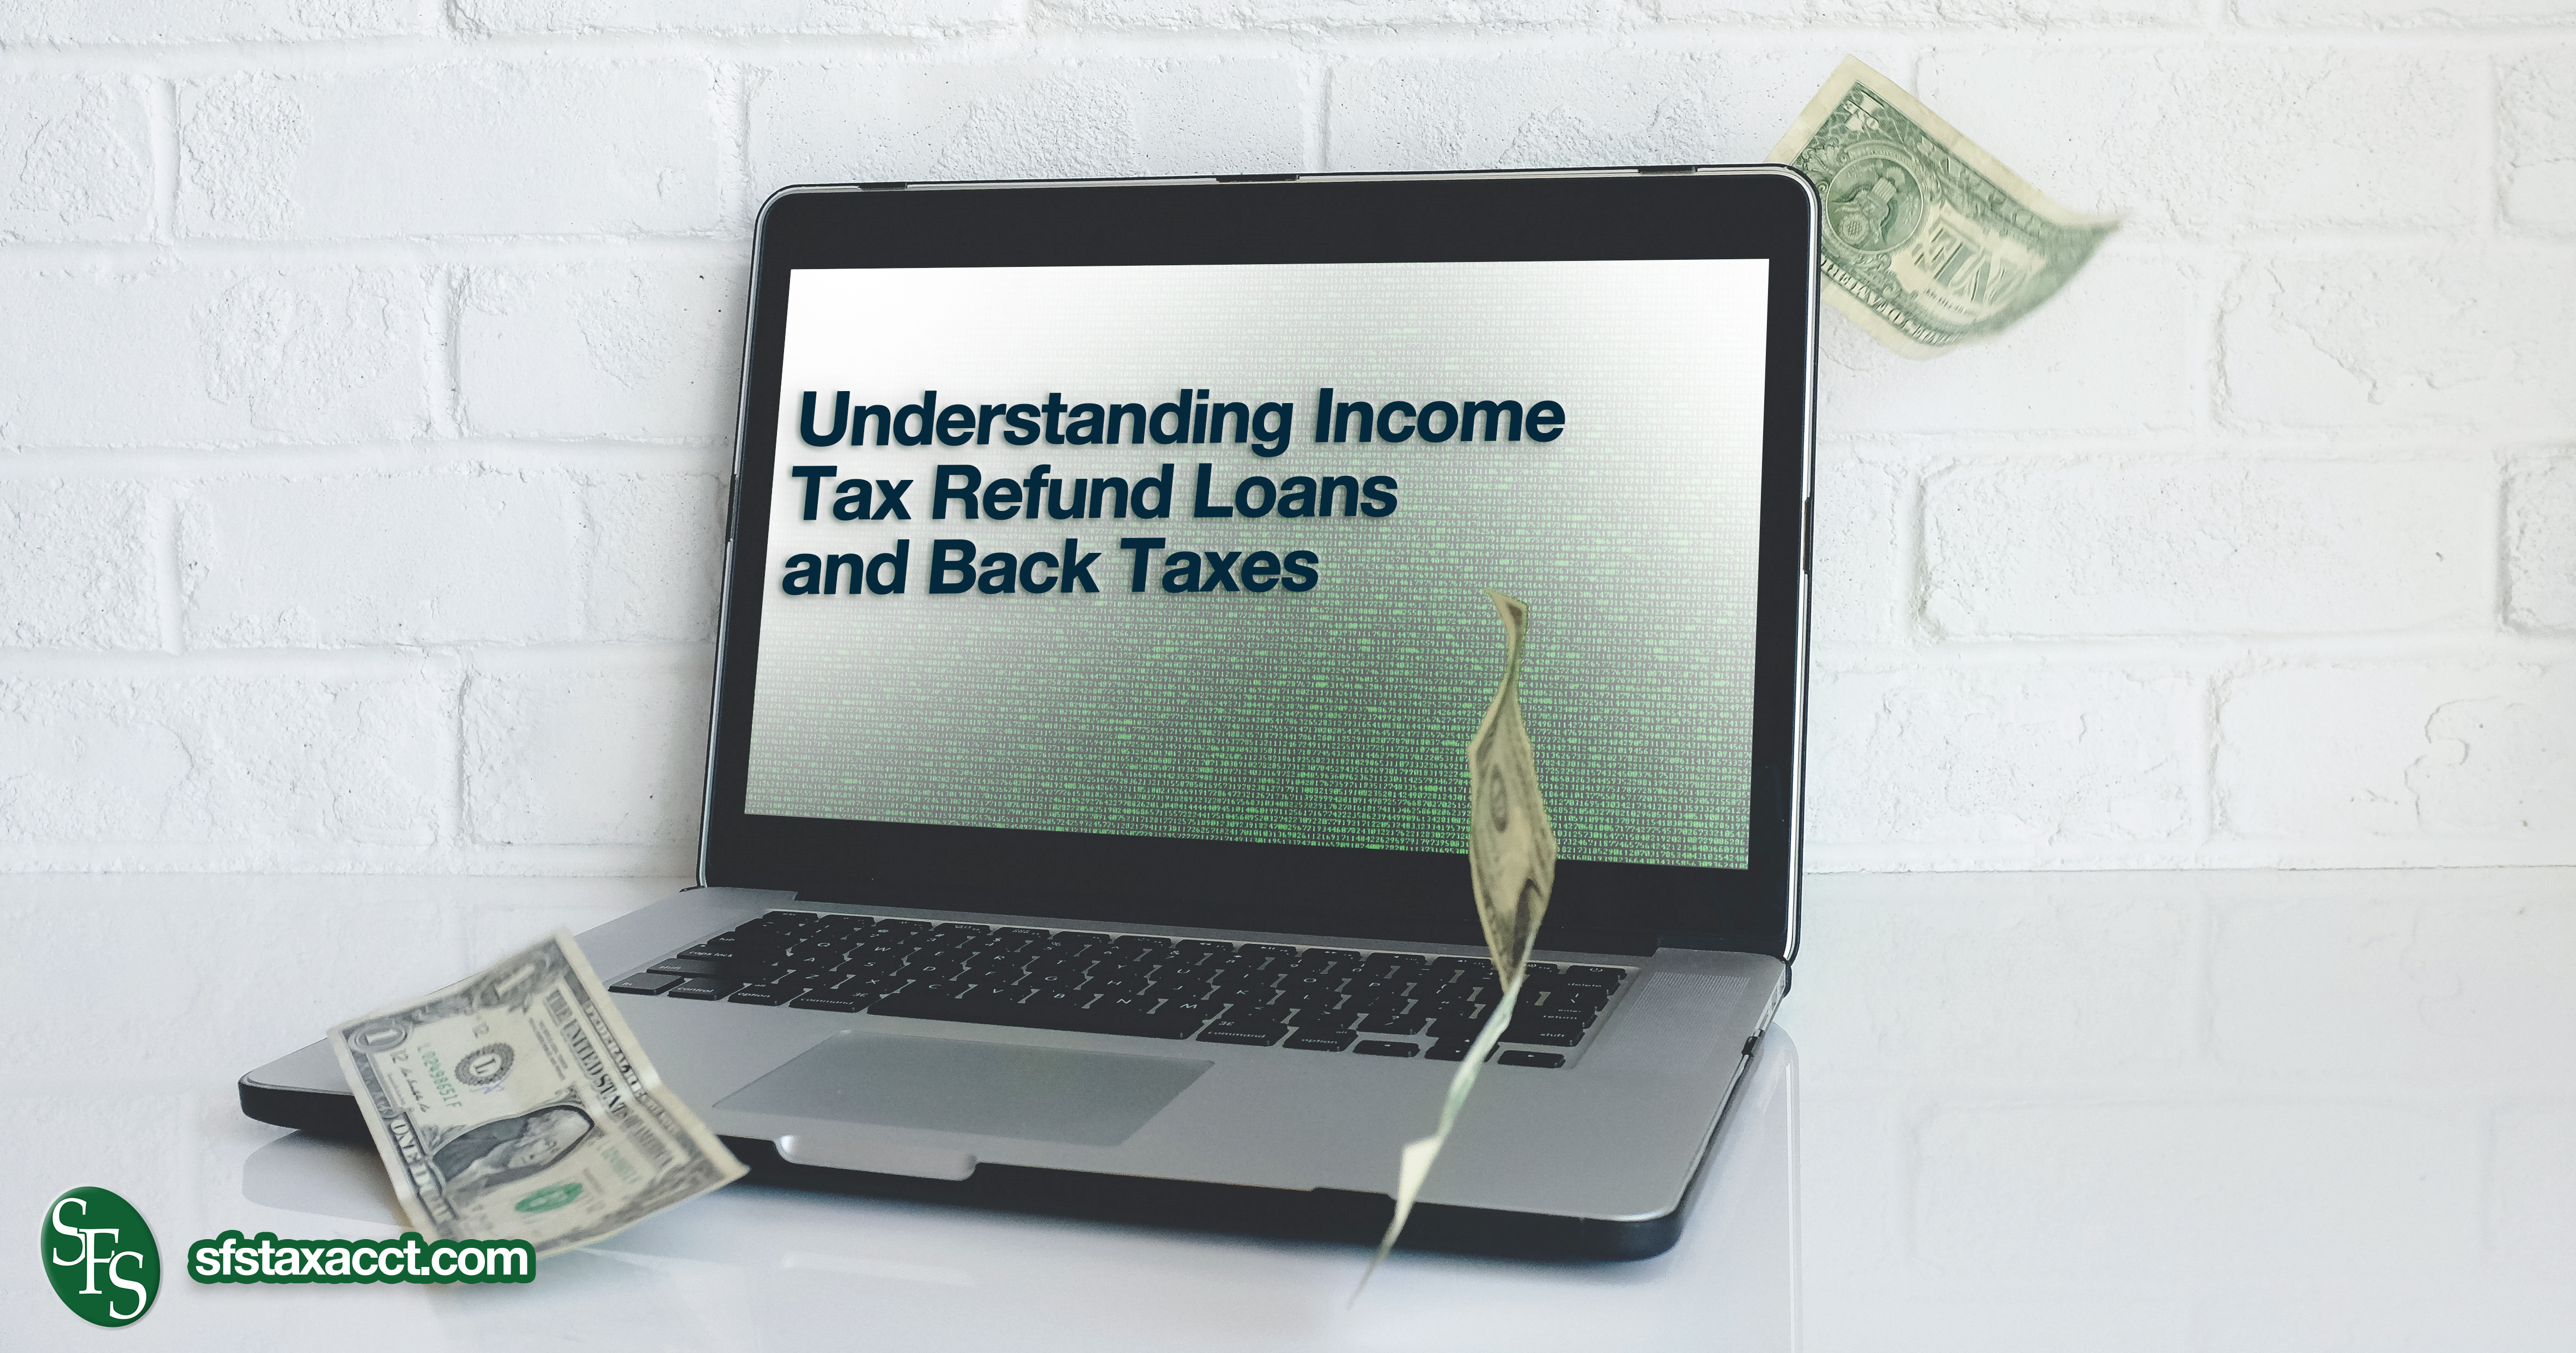 Understanding Income Tax Refund Loans and Back Taxes - SFS Tax & Accounting Services